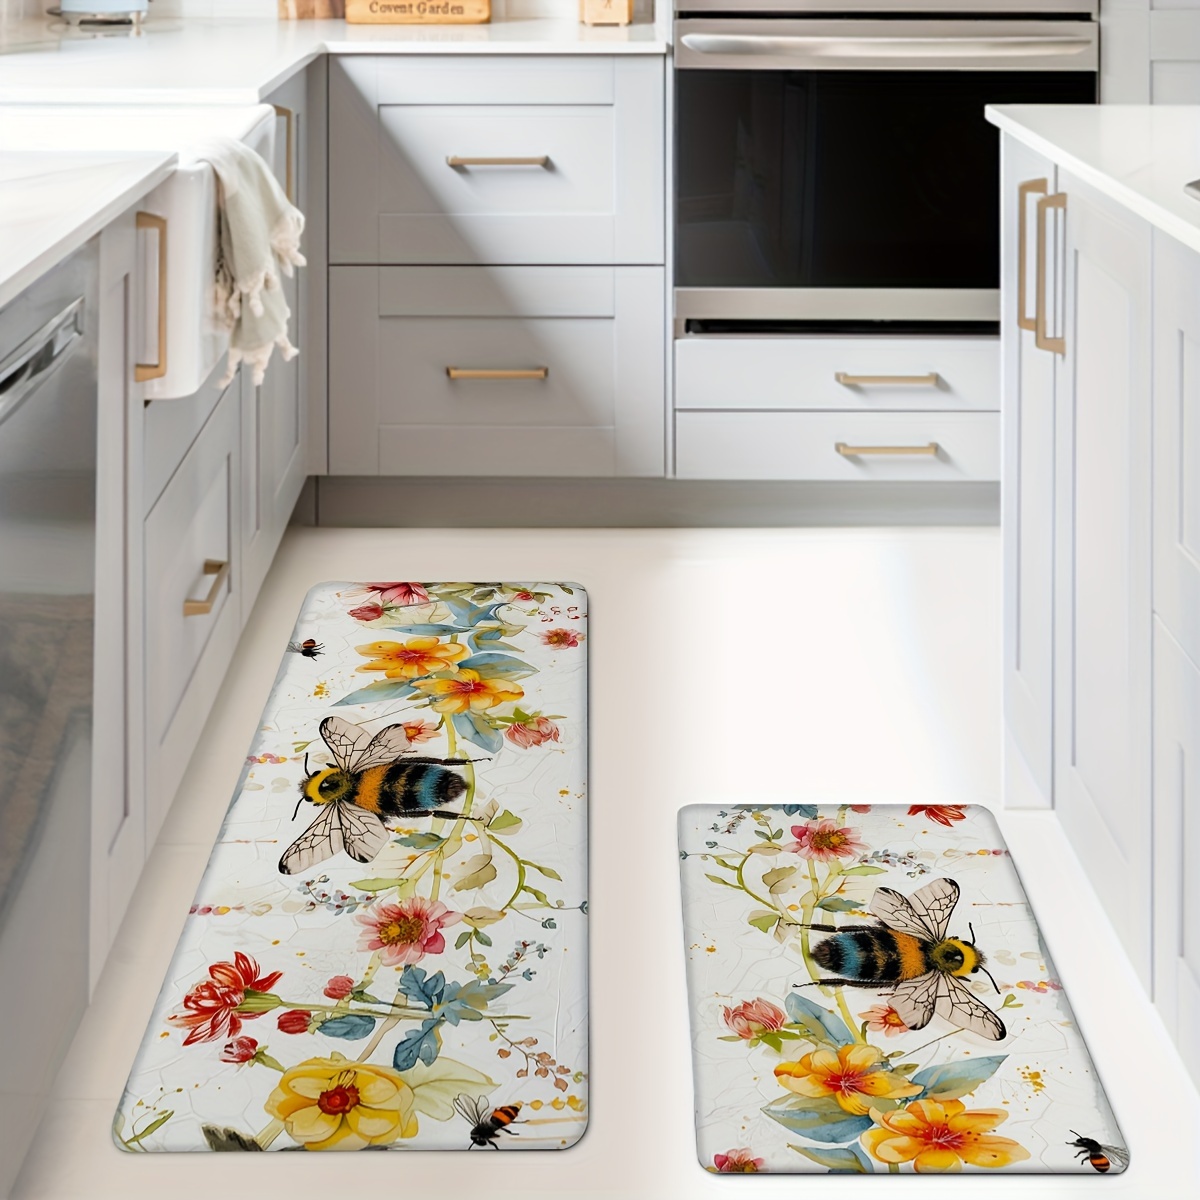 

1pc/2pcs, Bee Flowers Kitchen Mats, Non-slip And Durable Bathroom Pads For Floor, Comfortable Standing Runner Rugs, Carpets For Kitchen, Home, Office, Laundry Room, Bathroom, Spring Decor